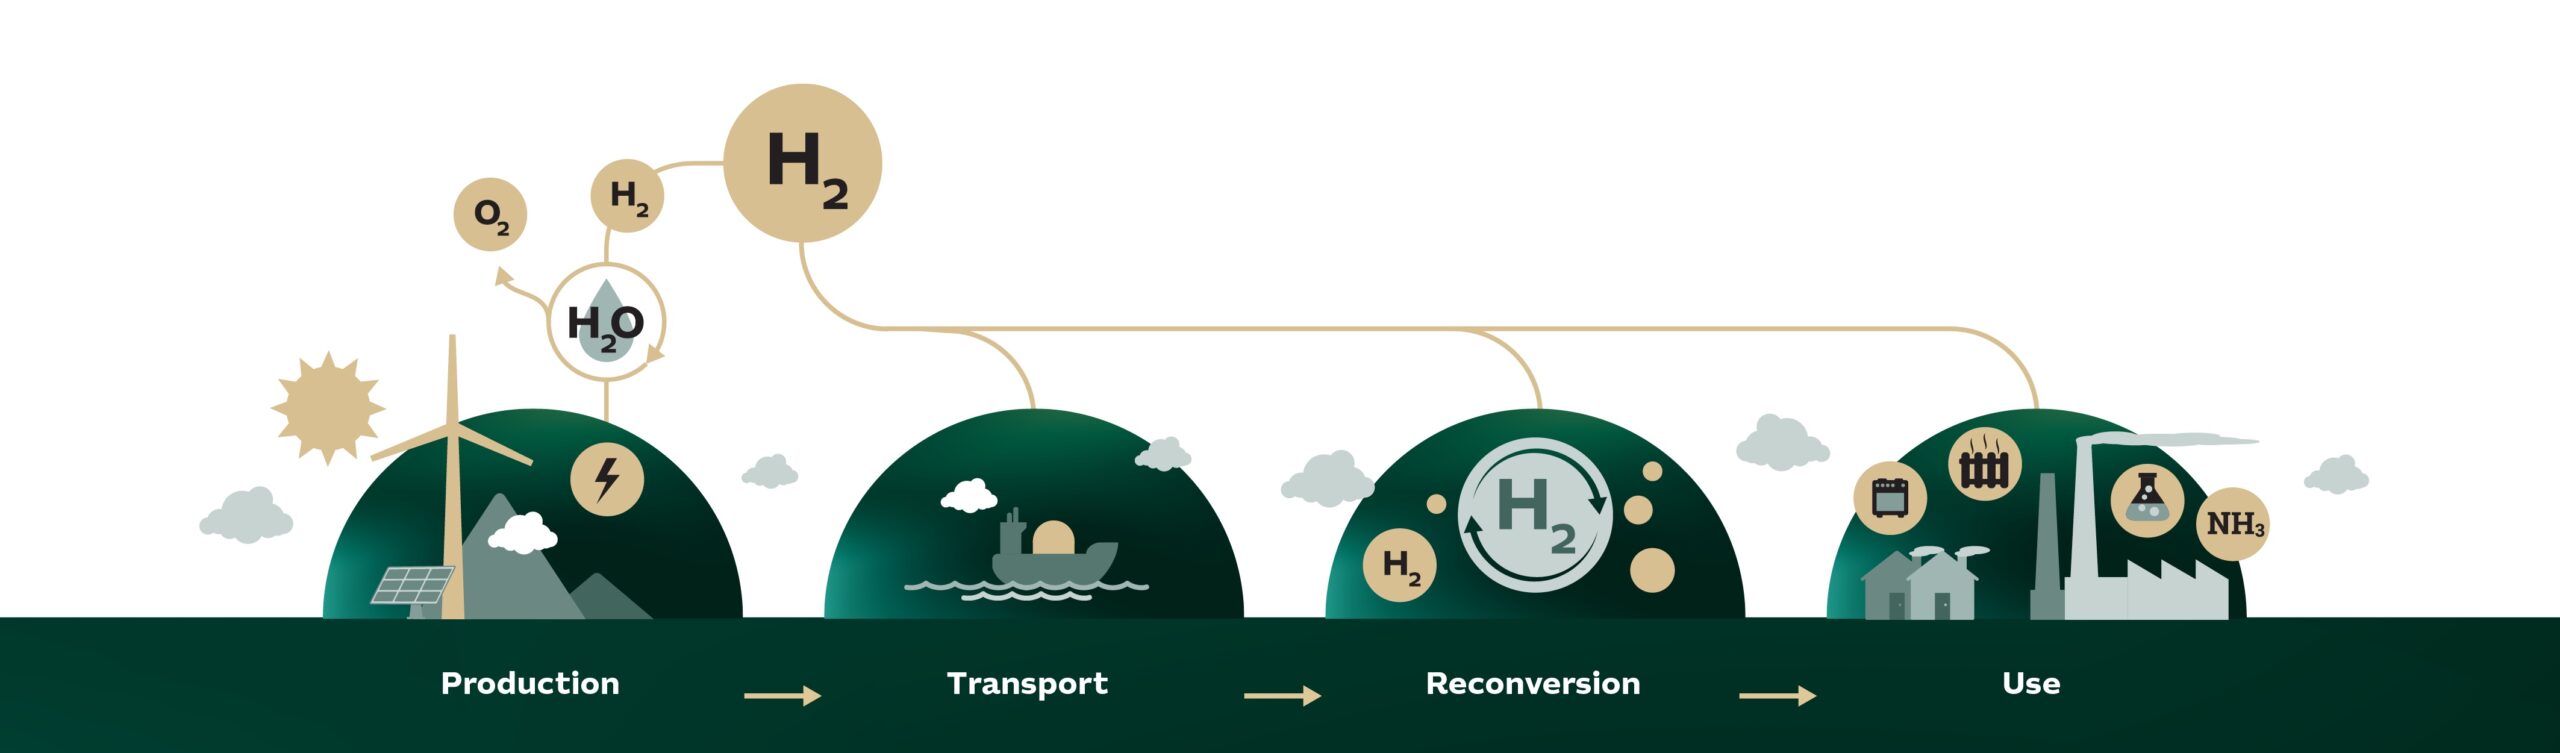 Flowchart showing the life cycle of hydrogen from production to transport, to reconversion to use.